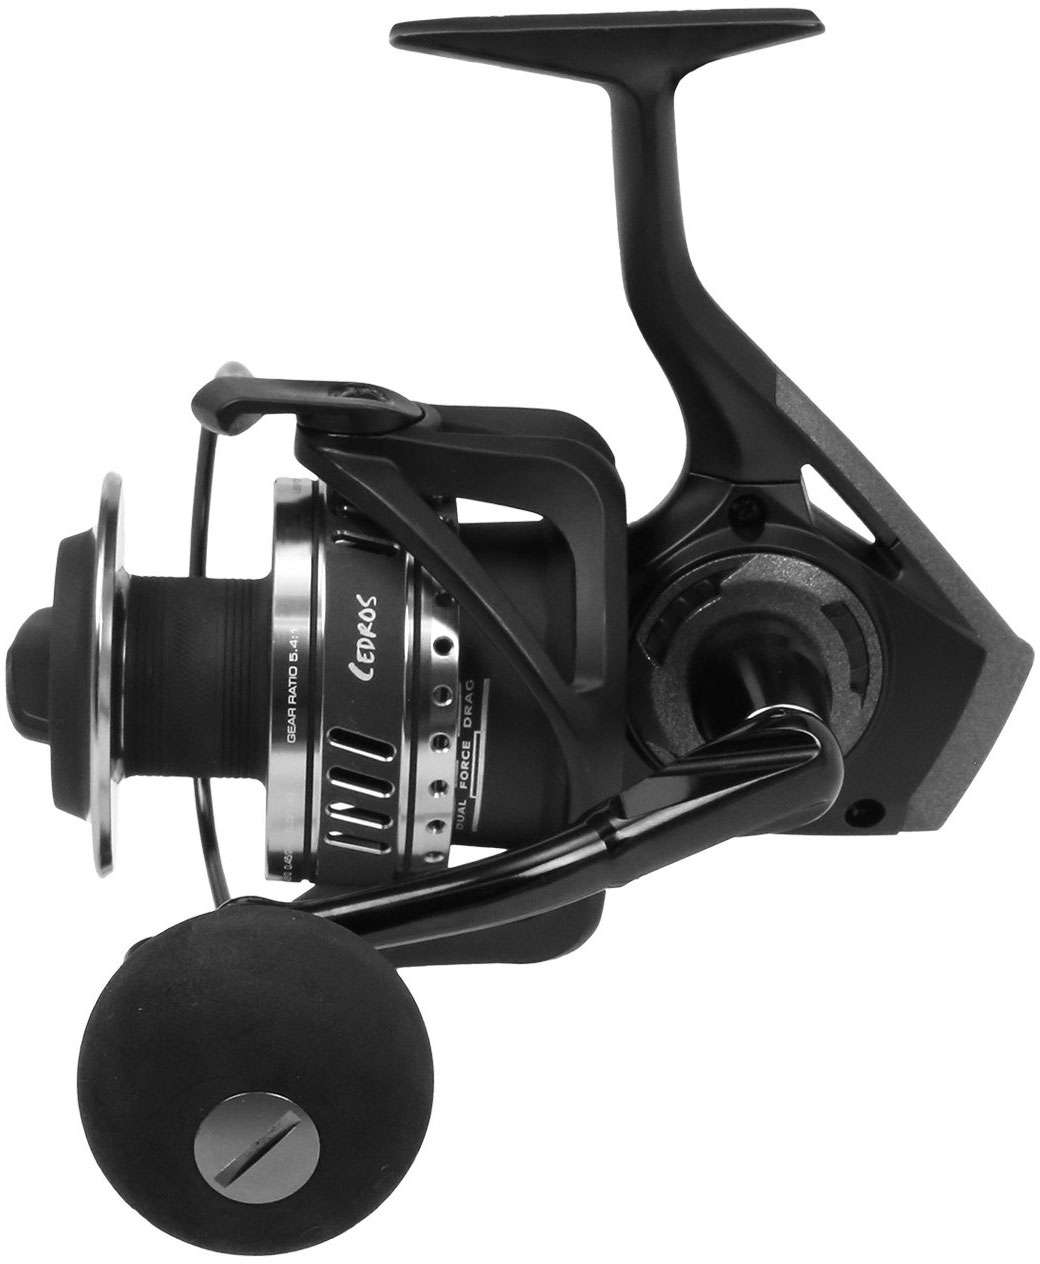 Page 3 - Buy Okuma Fishing Products Online at Best Prices in India